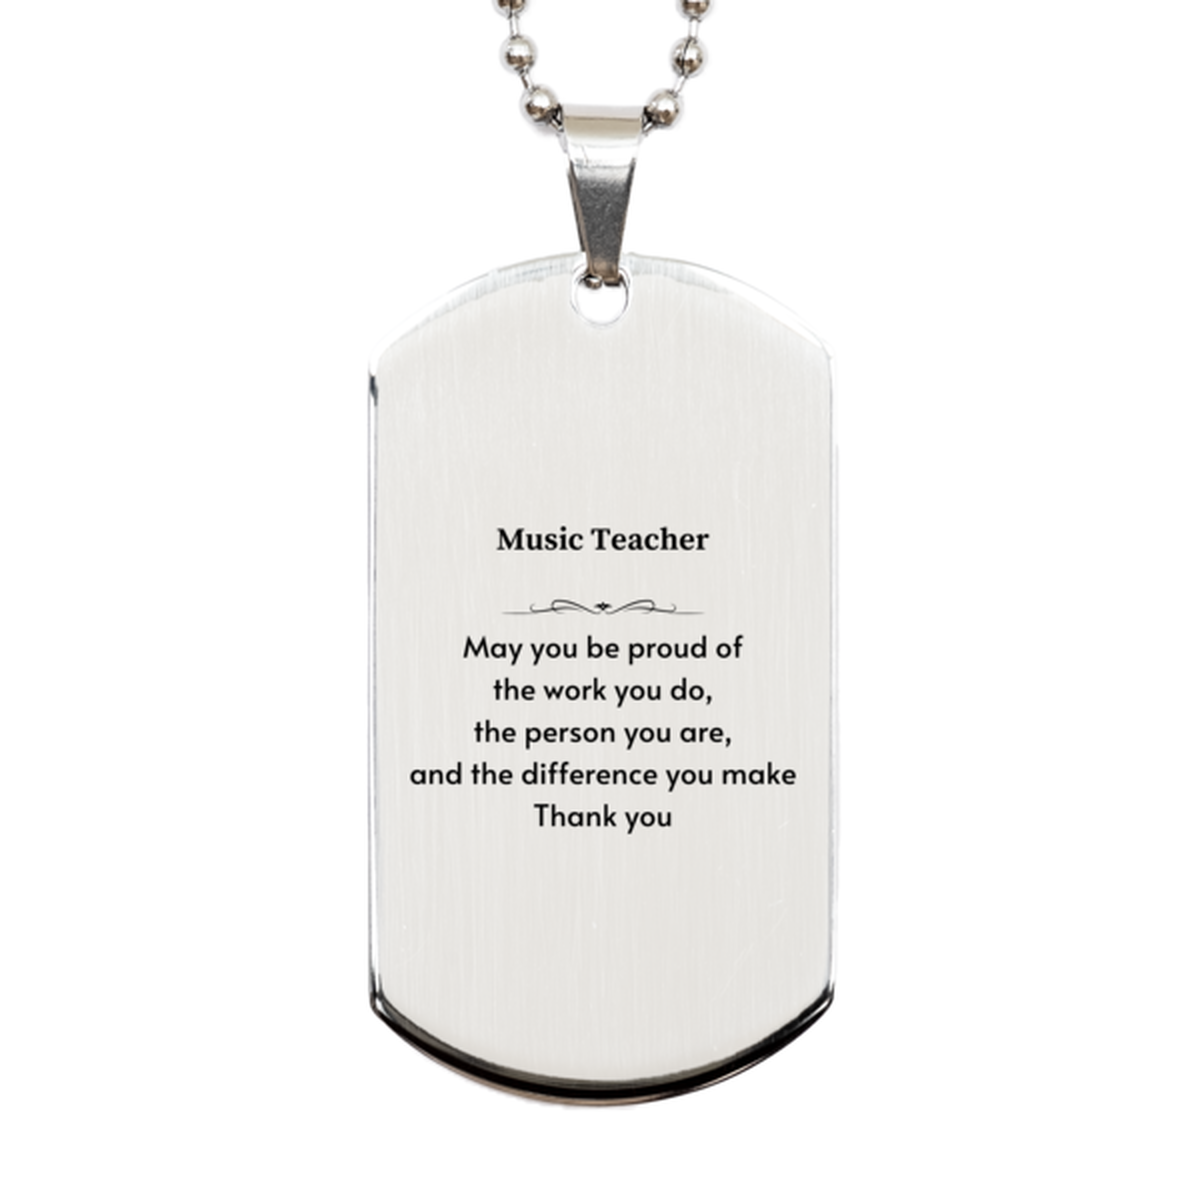 Heartwarming Silver Dog Tag Retirement Coworkers Gifts for Music Teacher, Music Teacher May You be proud of the work you do, the person you are Gifts for Boss Men Women Friends